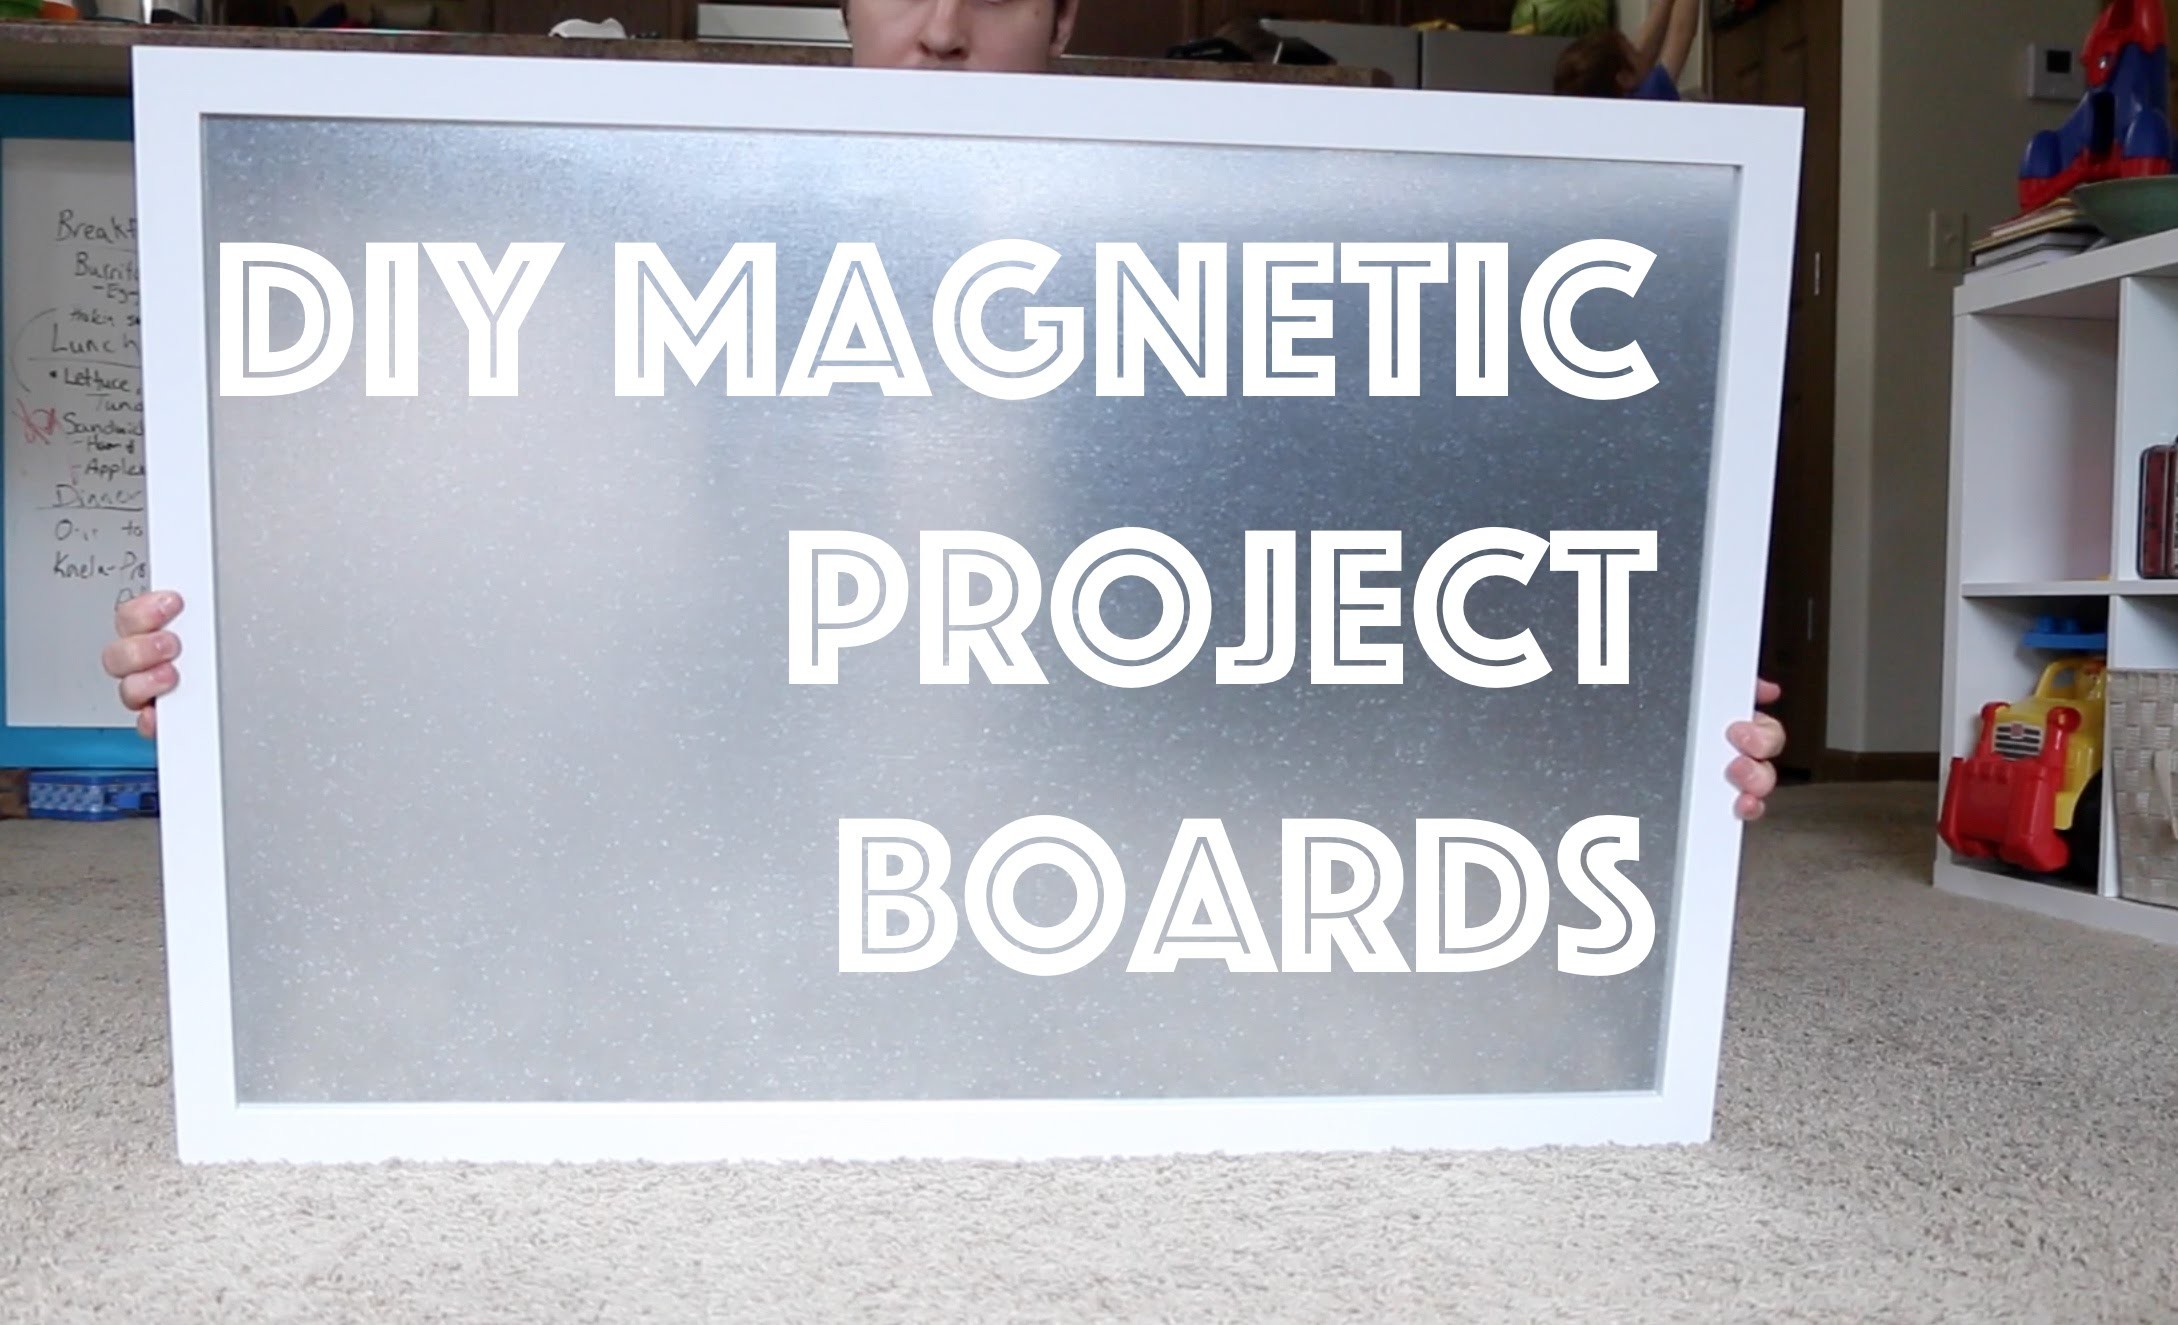 How To Make Magnetic Project Boards | The Imperfect Projects